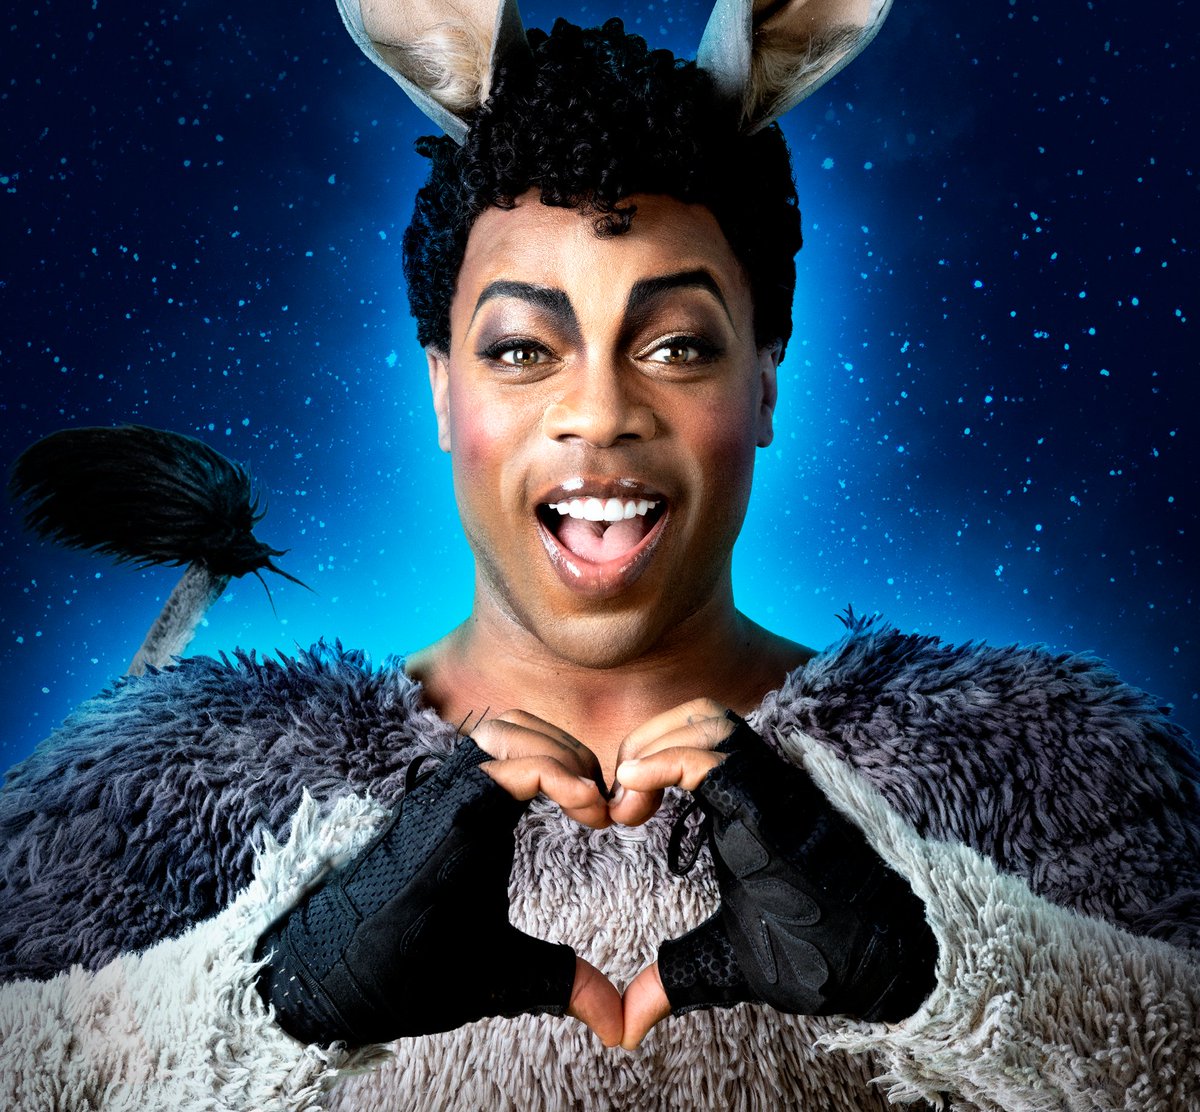 Todrick Hall joins the London run of SHREK THE MUSICAL this summer: londonboxoffice.co.uk/news/post/todr…